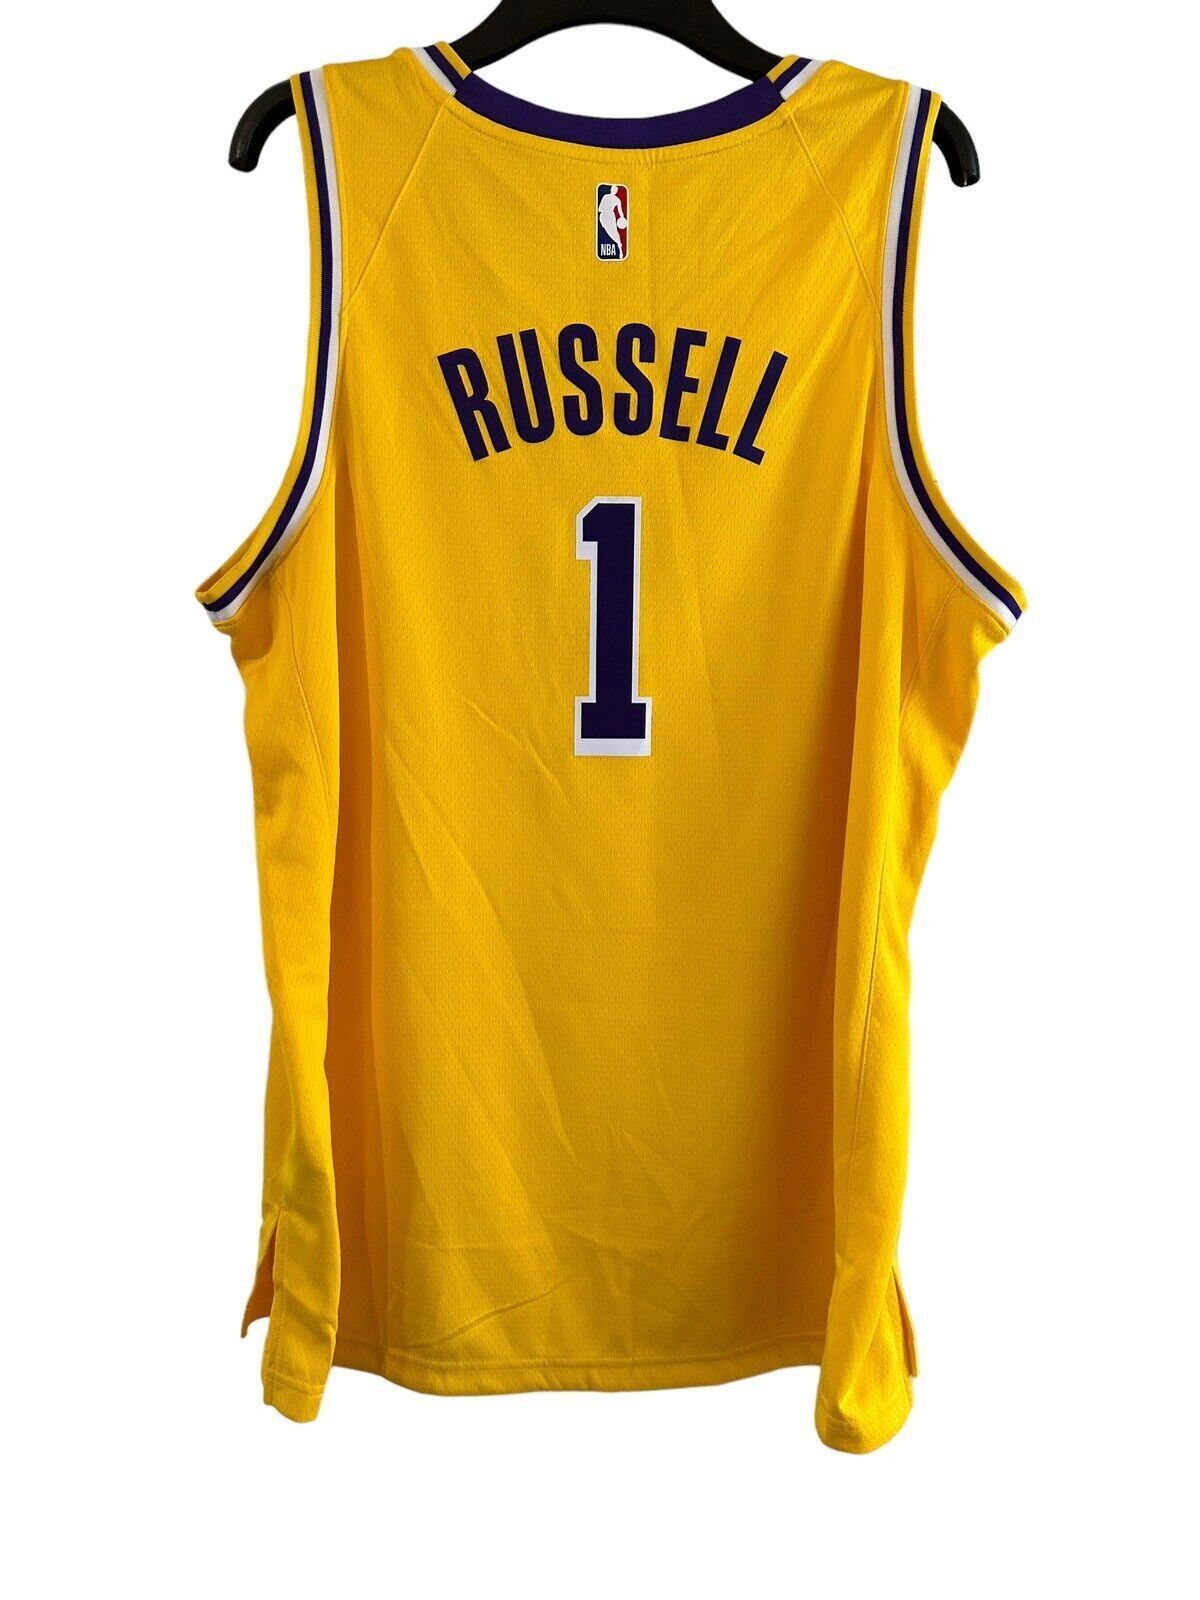 Nike NBA LA Lakers Icon Edition Jersey RUSSELL 1 Men’s XL *DF*